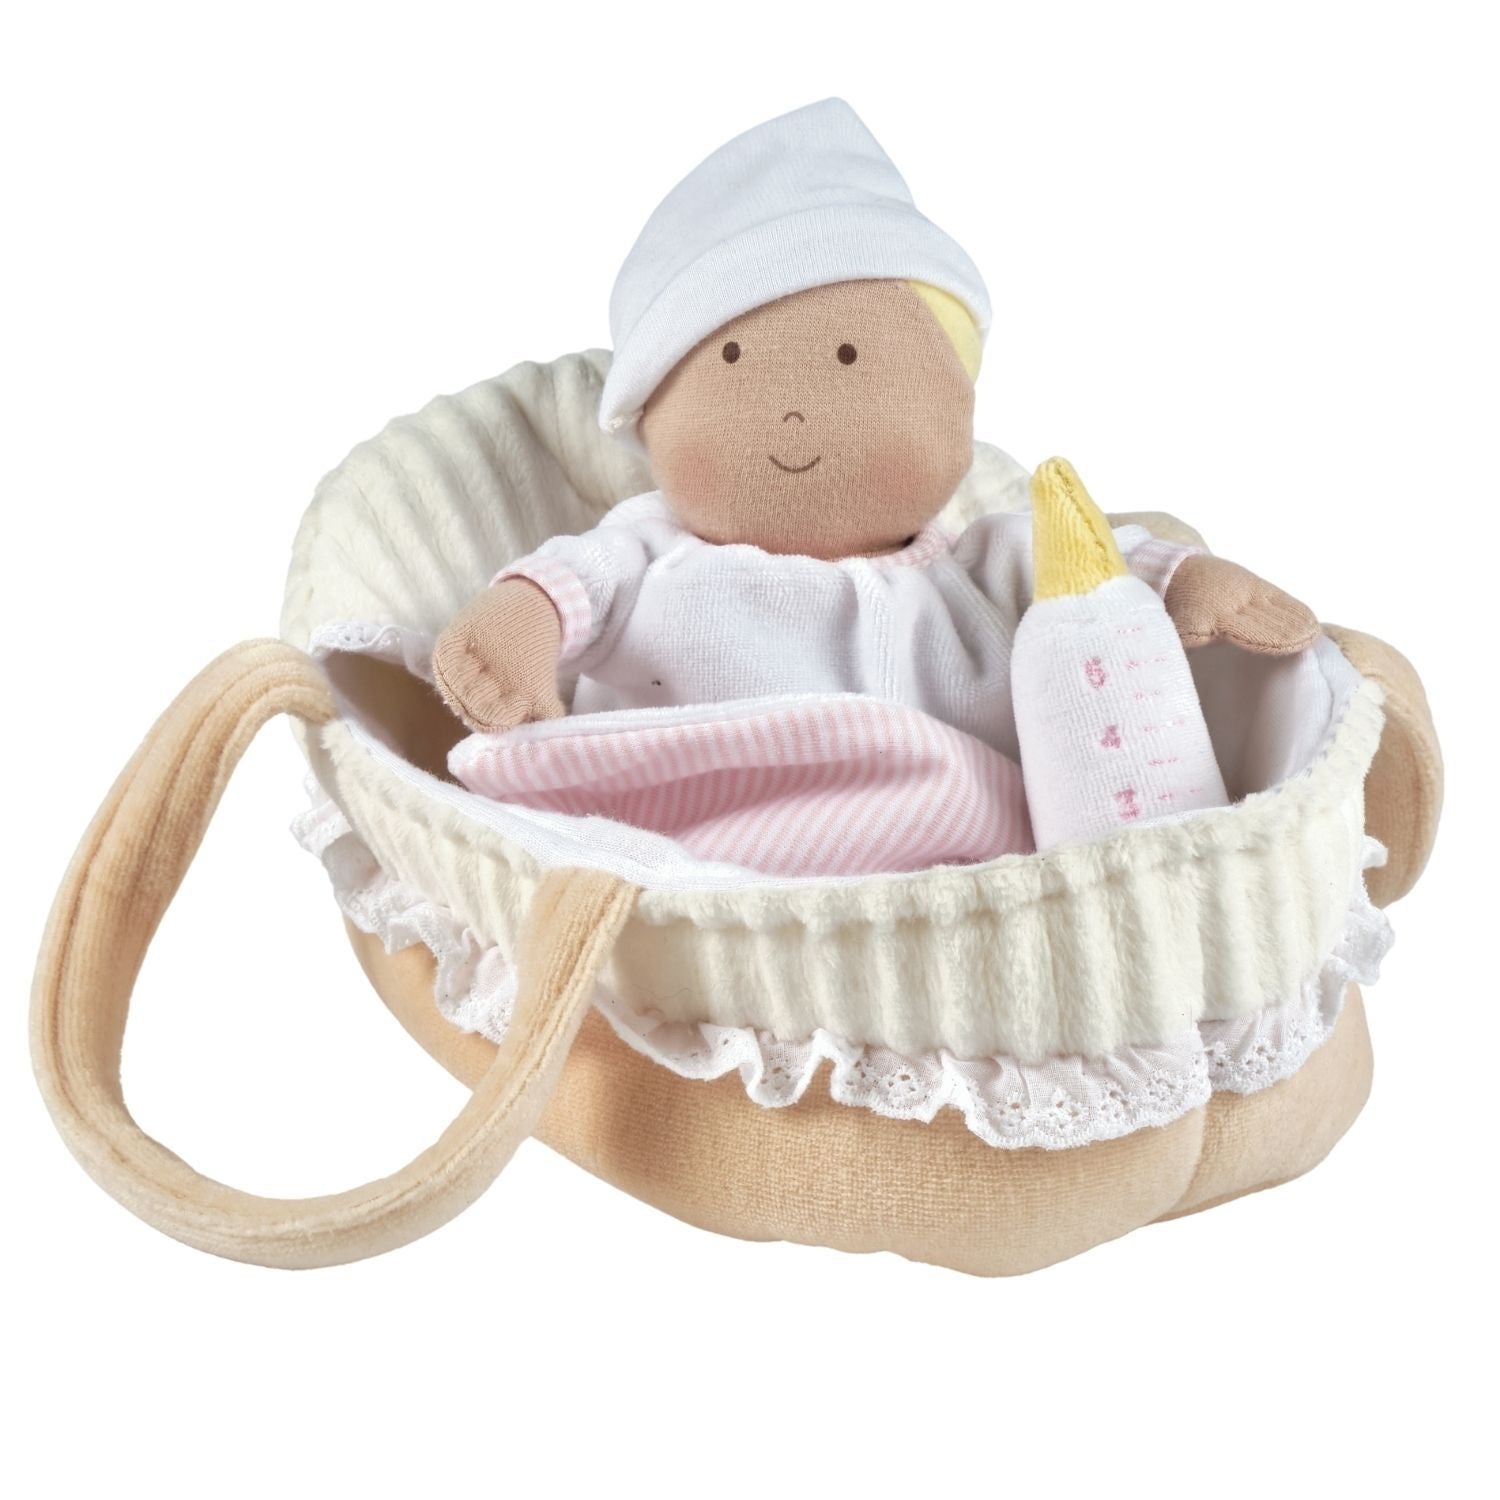 Grace Baby Soft Doll with Carrycot, Bottle & Blanket